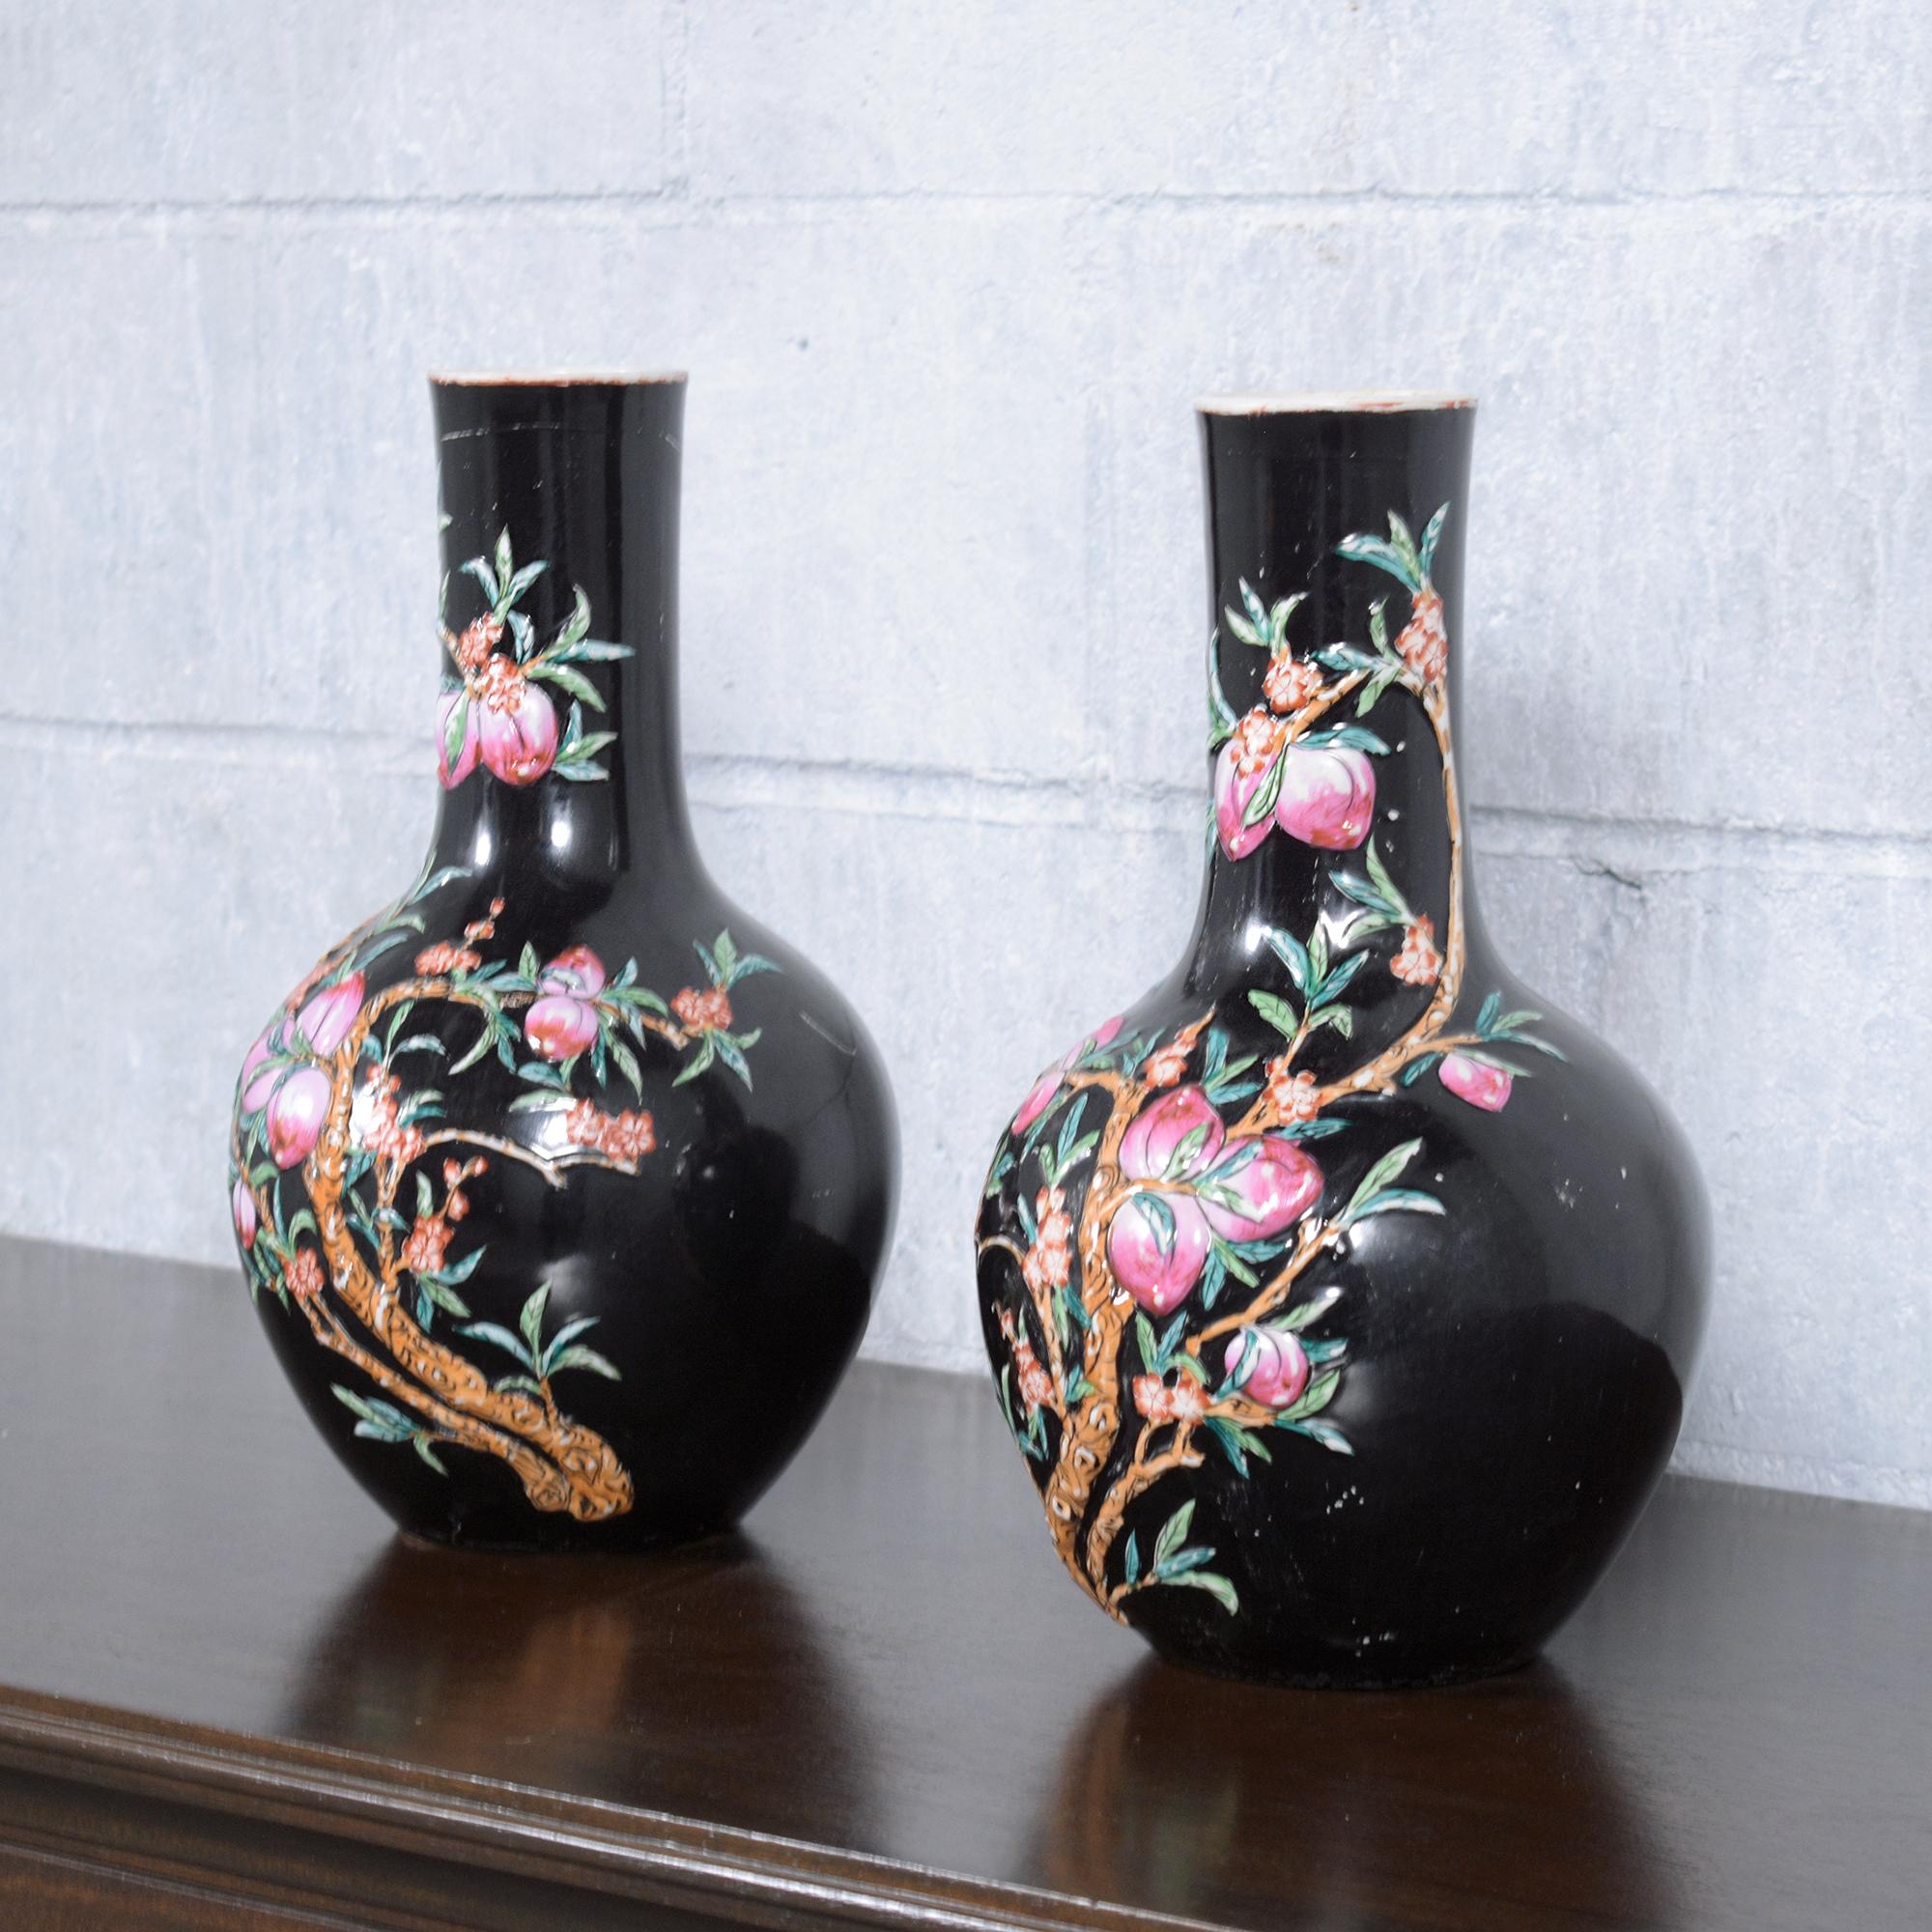 Discover the charm and beauty of traditional Chinese artistry with our pair of vintage Chinese porcelain vases. These exquisite pieces are in good condition, showcasing the finesse and detail that is characteristic of classic Chinese porcelain. Each